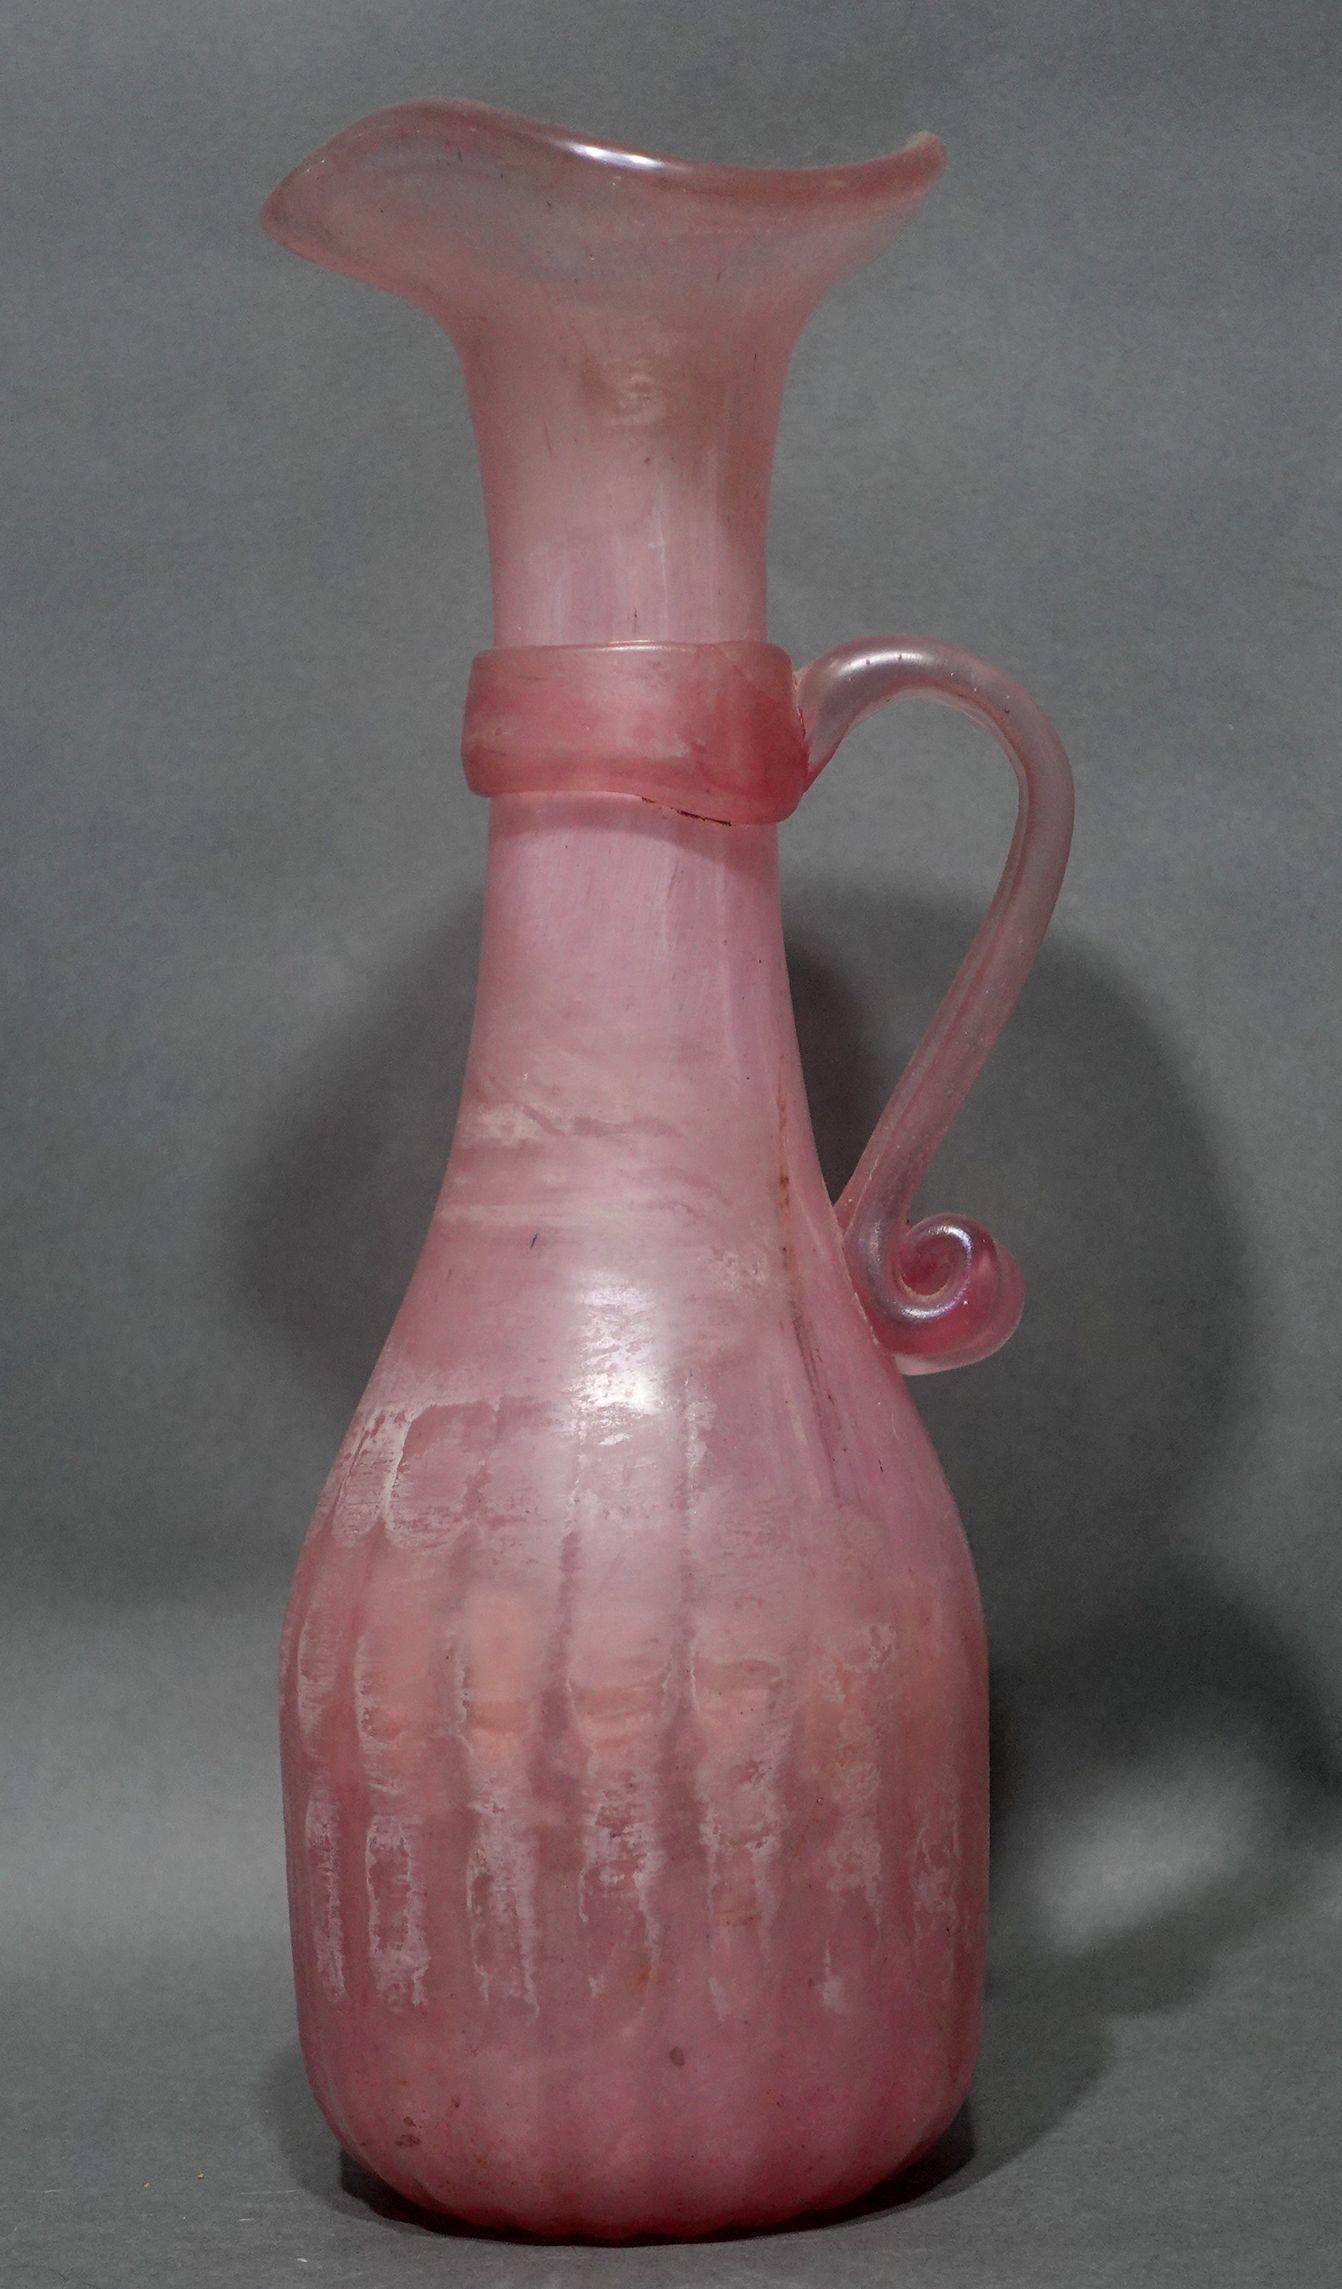 Beautiful Vintage opaque pink Italian art glass pitcher. Handcrafted and hand blown. Surface wear is consistent with exposure with polished pontils on the bottom. Measures approx. 4.5 inches wide and 12 inches tall. New old inventory, made in Italy.